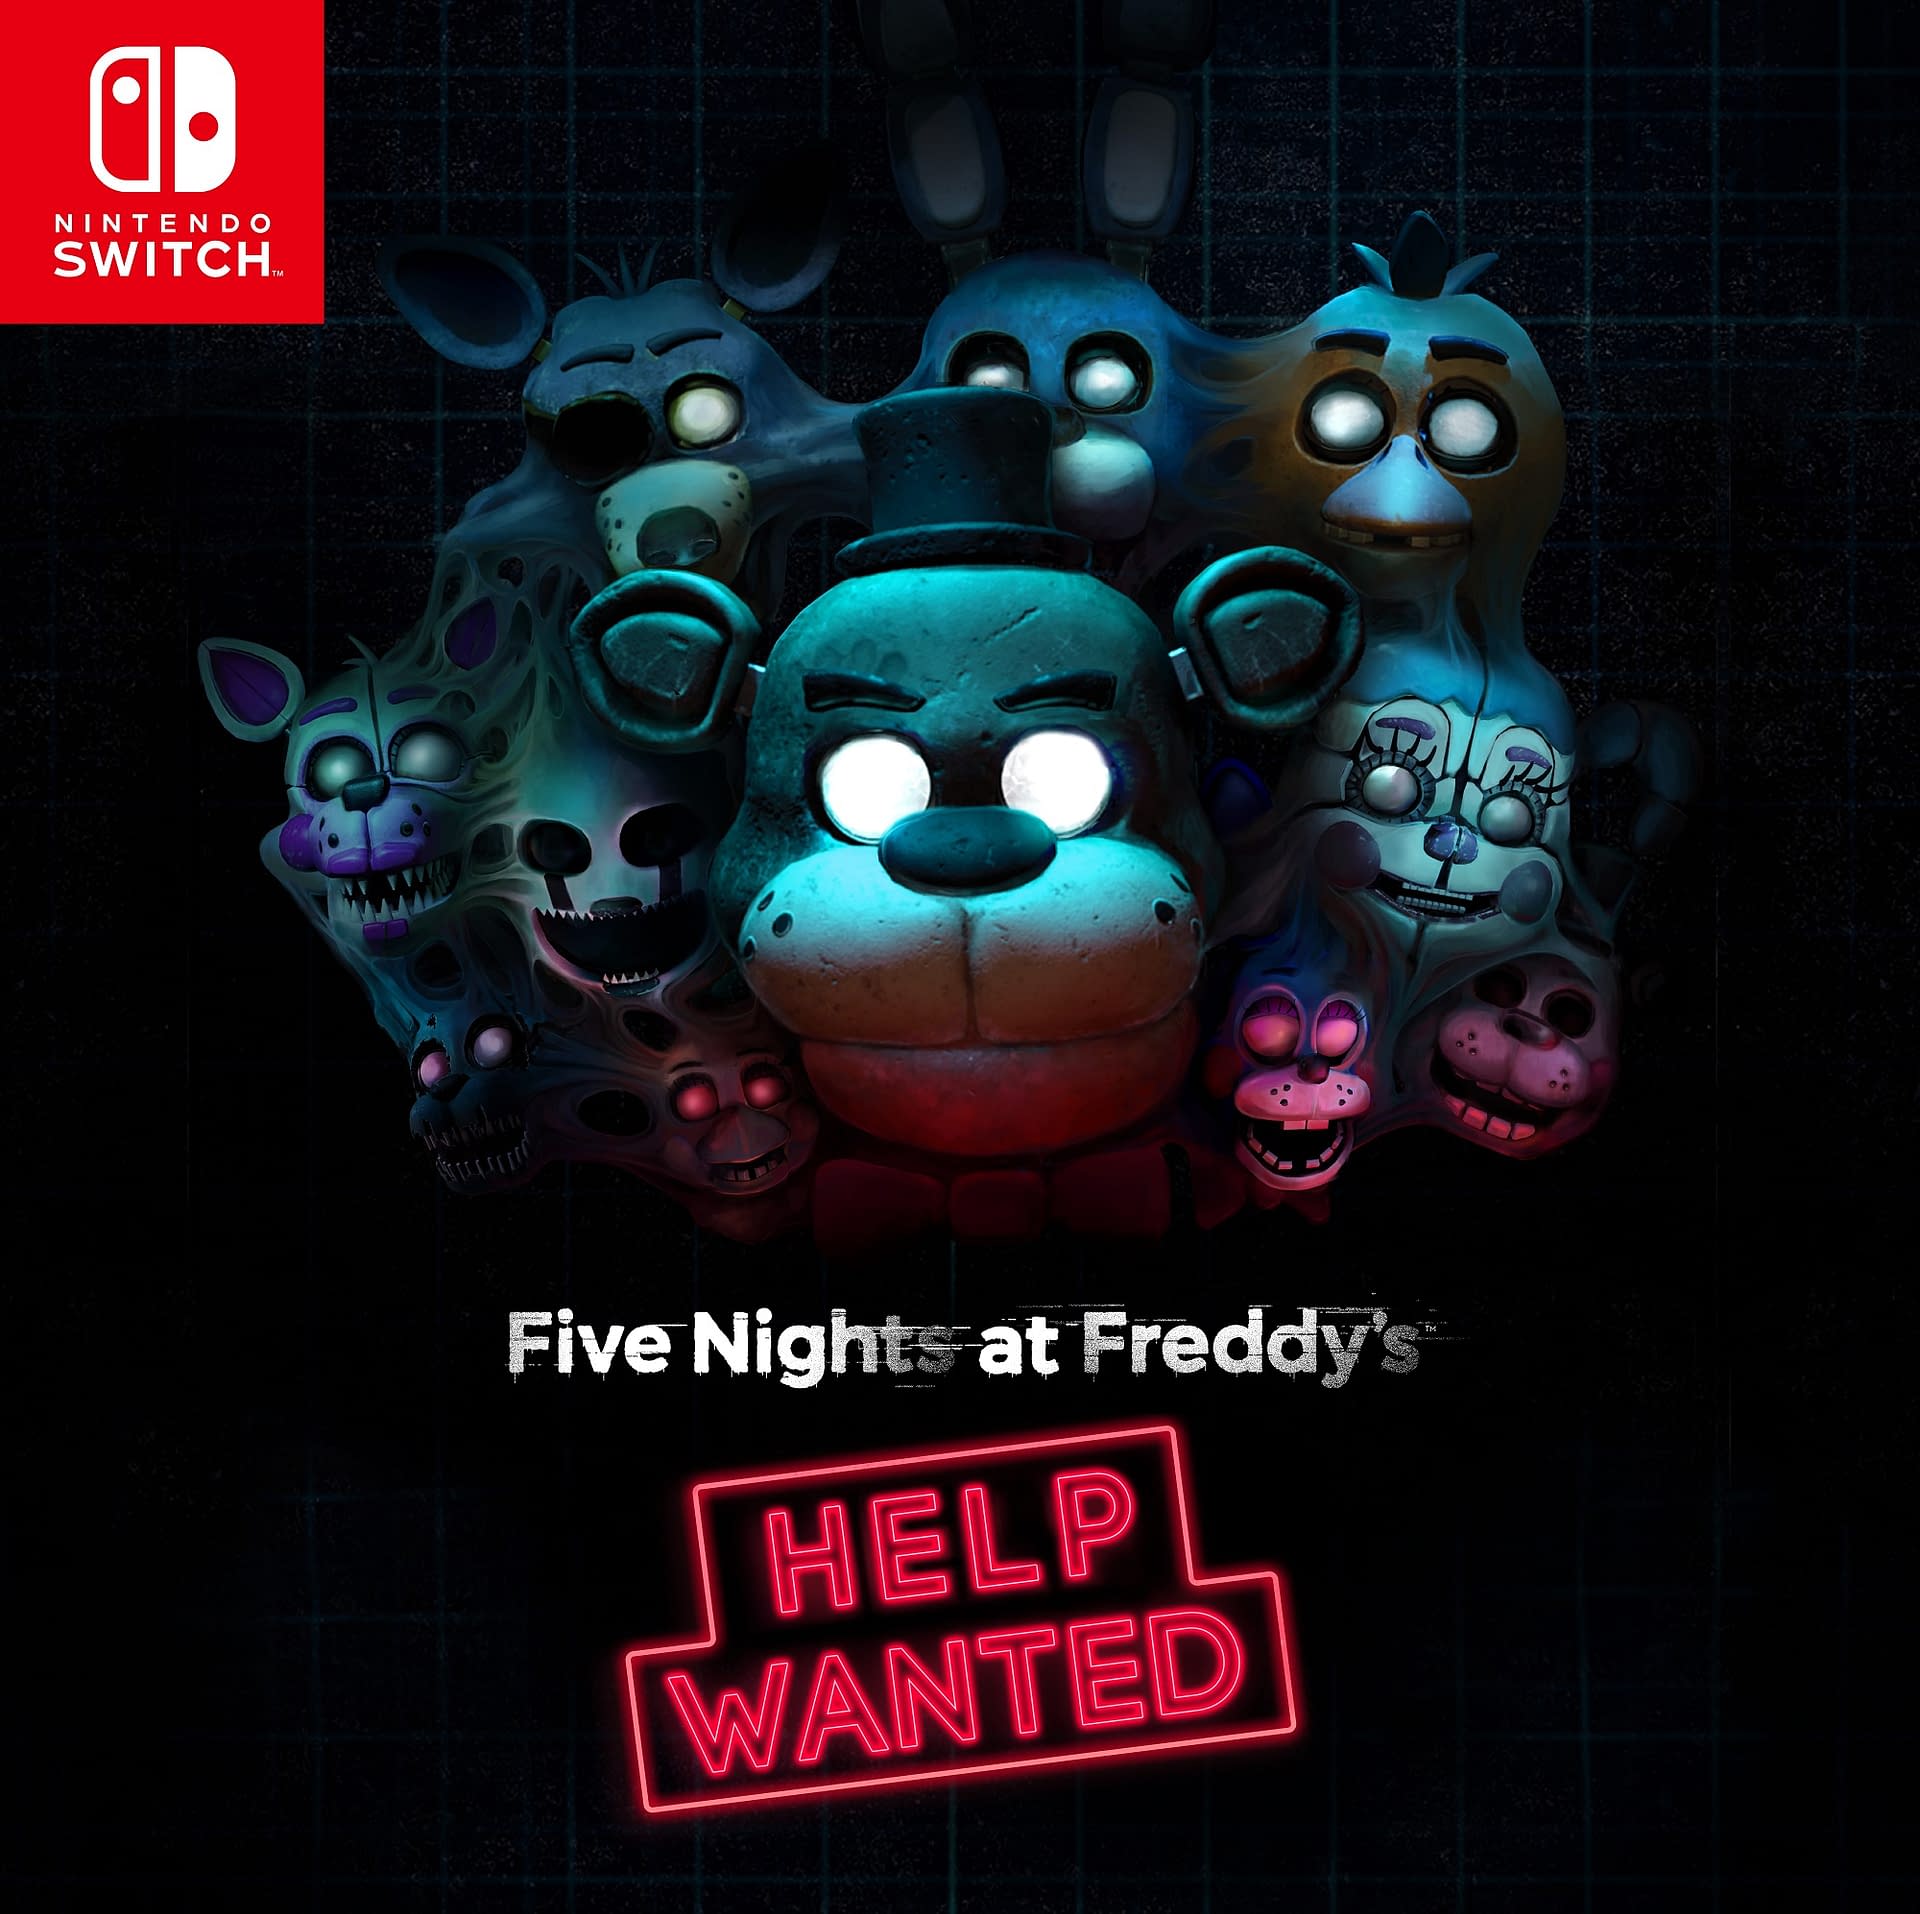 five nights at freddy's nintendo switch